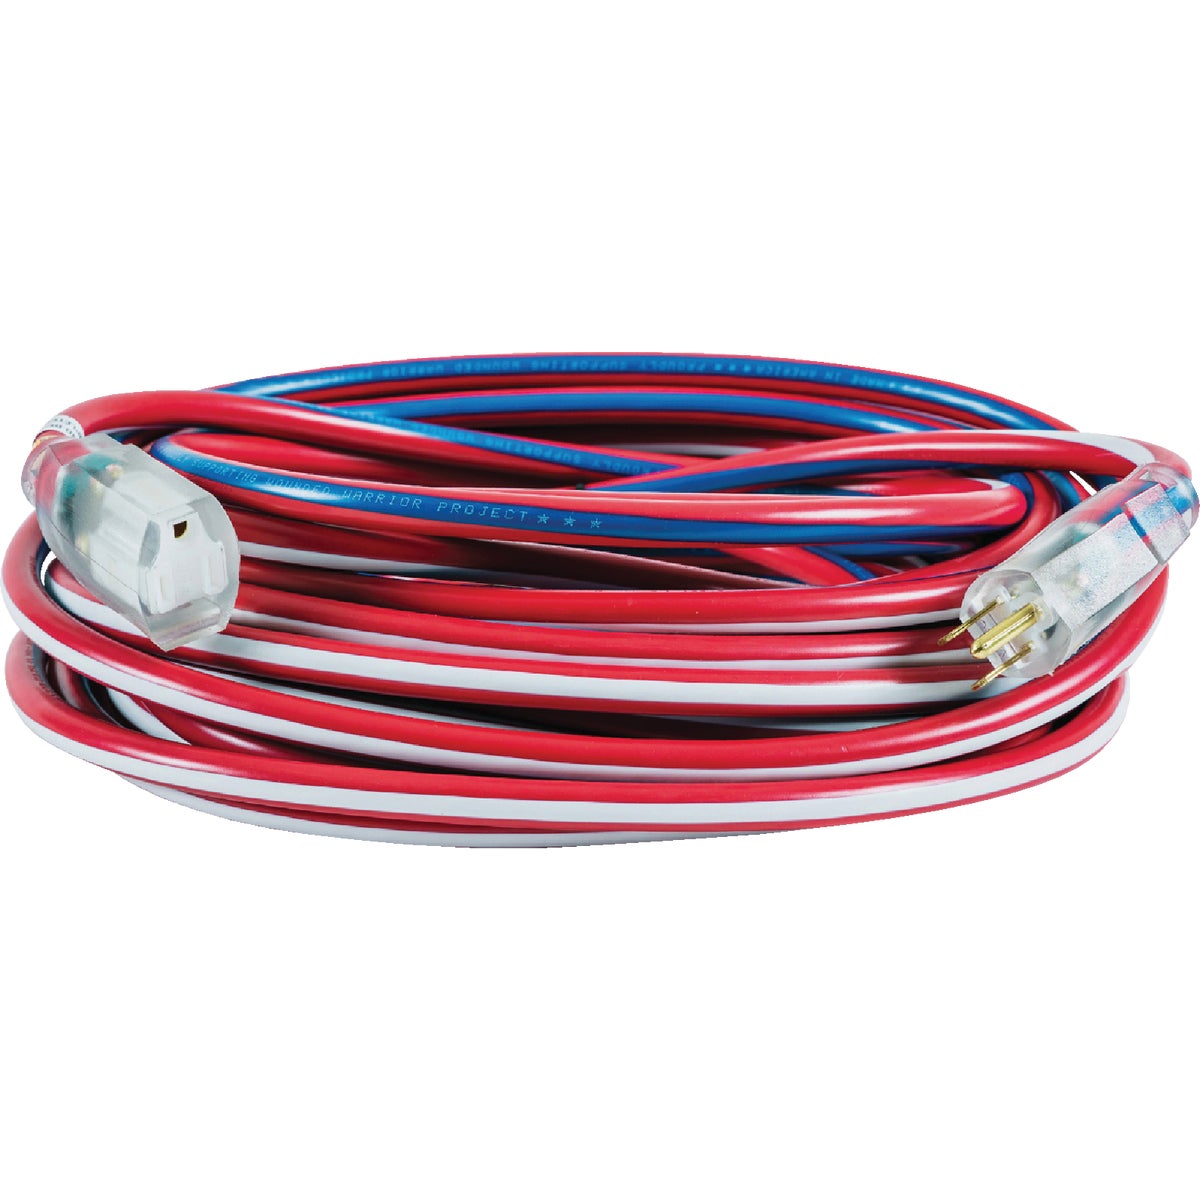 Item 511626, Contractor grade extension cord with lighted end.